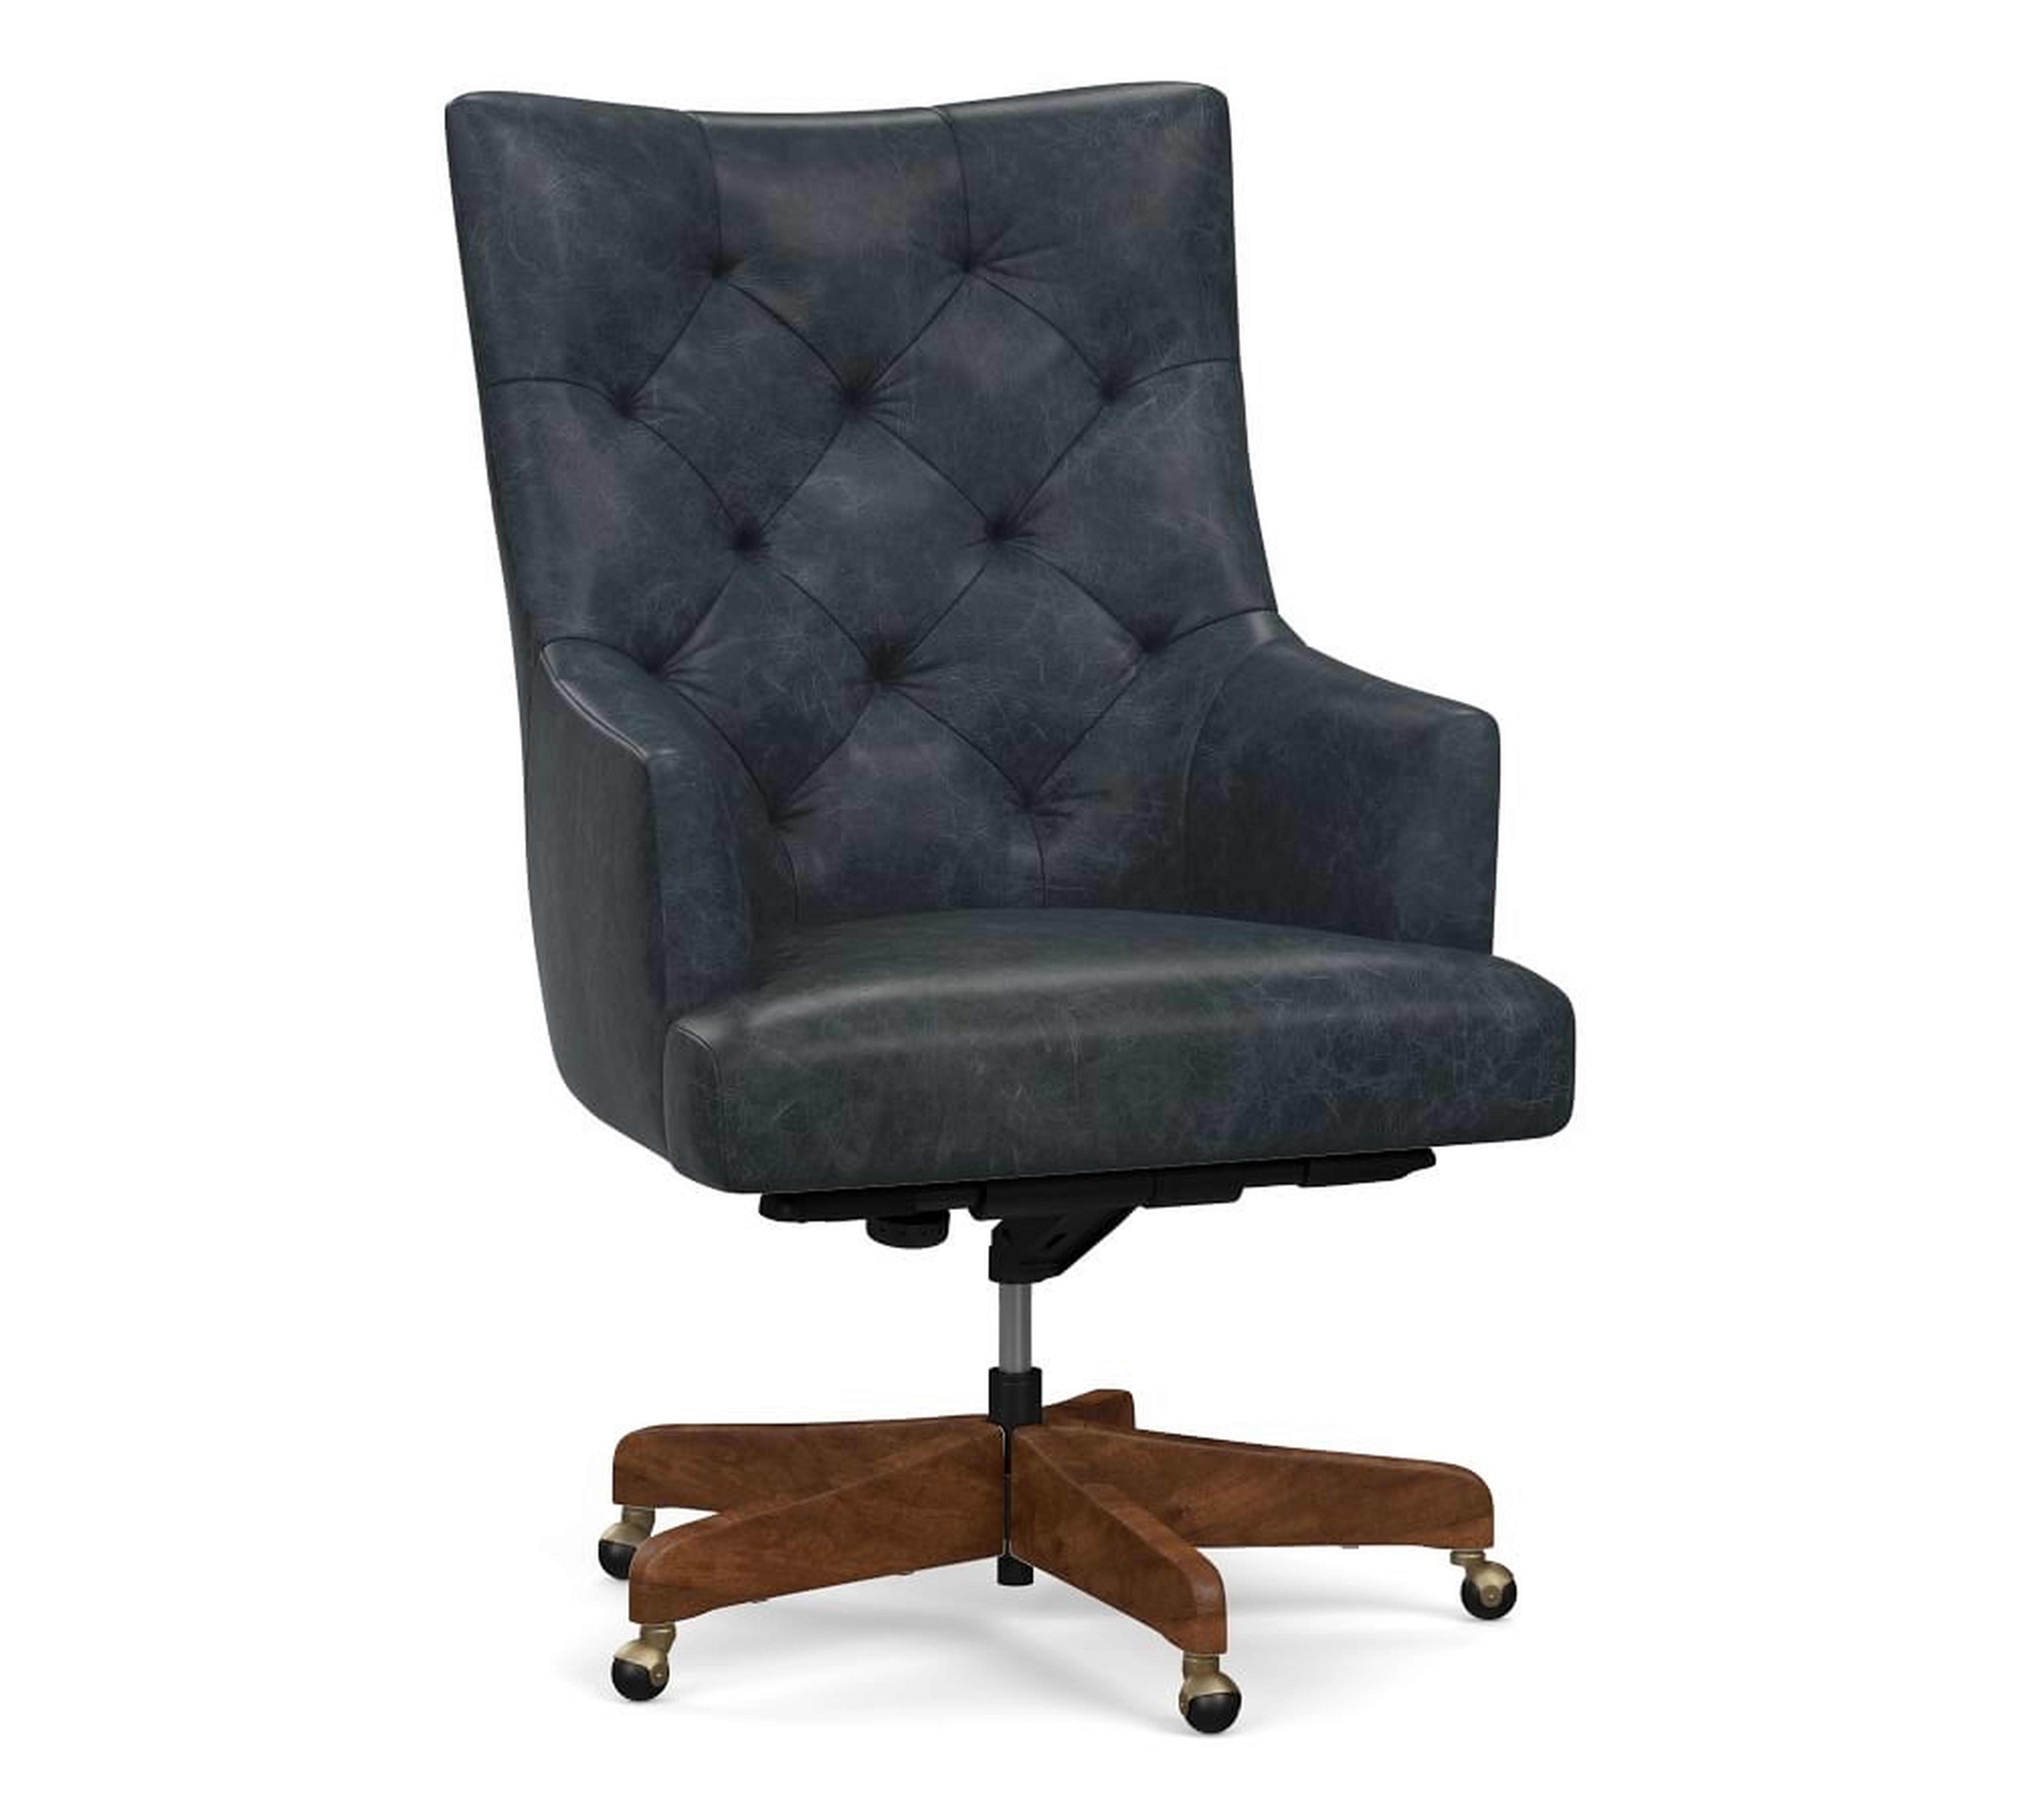 Radcliffe Tufted Leather Swivel Desk Chair, Rustic Brown Base, Statesville Indigo Blue - Pottery Barn